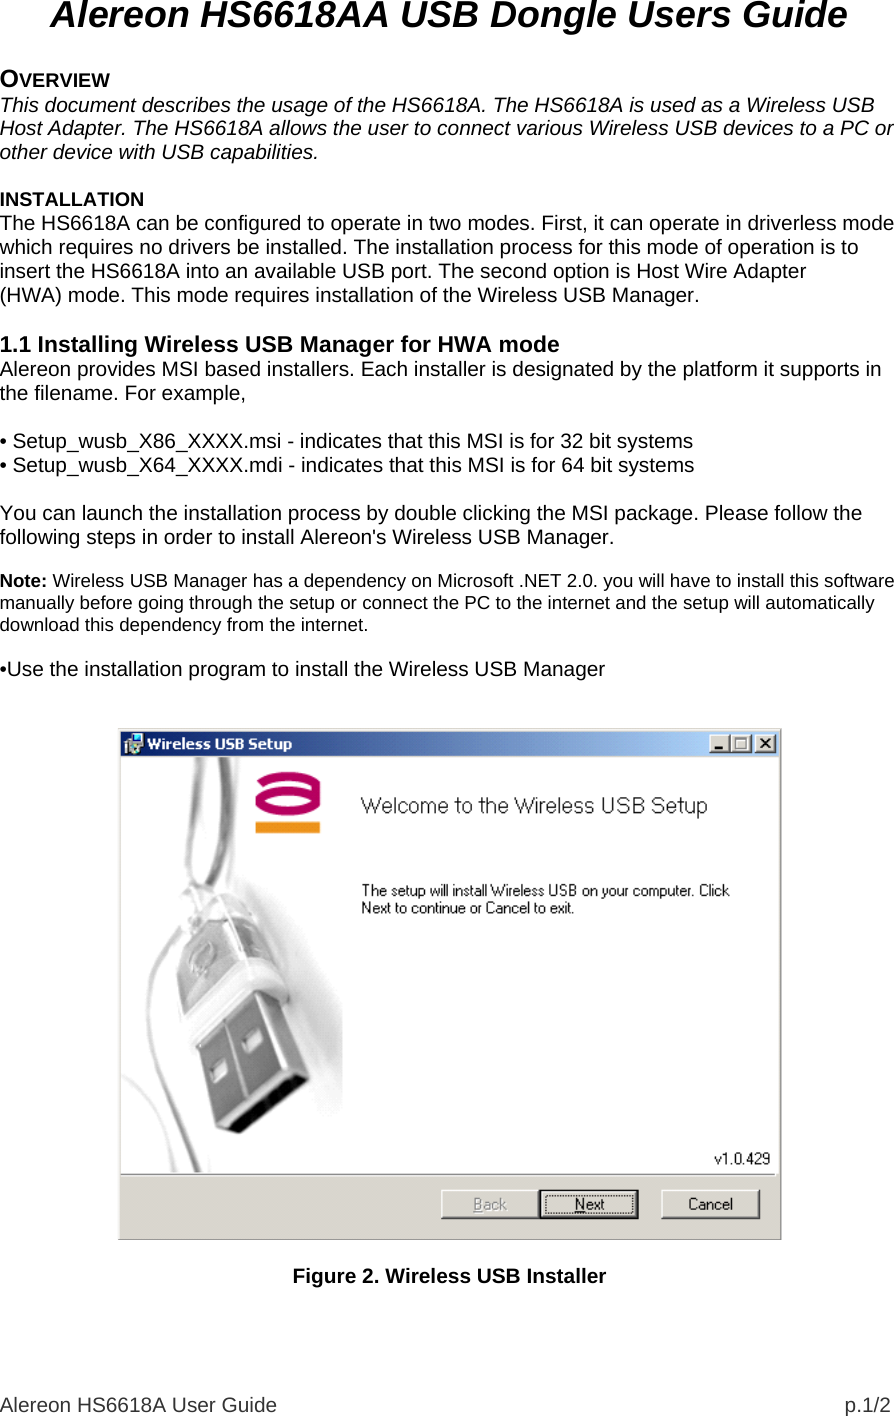 Alereon HS6618A User Guide                                                                                                  p.1/2 Alereon HS6618AA USB Dongle Users Guide  OVERVIEW This document describes the usage of the HS6618A. The HS6618A is used as a Wireless USB Host Adapter. The HS6618A allows the user to connect various Wireless USB devices to a PC or other device with USB capabilities.  INSTALLATION The HS6618A can be configured to operate in two modes. First, it can operate in driverless mode which requires no drivers be installed. The installation process for this mode of operation is to insert the HS6618A into an available USB port. The second option is Host Wire Adapter (HWA) mode. This mode requires installation of the Wireless USB Manager.  1.1 Installing Wireless USB Manager for HWA mode Alereon provides MSI based installers. Each installer is designated by the platform it supports in the filename. For example,  • Setup_wusb_X86_XXXX.msi - indicates that this MSI is for 32 bit systems • Setup_wusb_X64_XXXX.mdi - indicates that this MSI is for 64 bit systems  You can launch the installation process by double clicking the MSI package. Please follow the following steps in order to install Alereon&apos;s Wireless USB Manager.  Note: Wireless USB Manager has a dependency on Microsoft .NET 2.0. you will have to install this software manually before going through the setup or connect the PC to the internet and the setup will automatically download this dependency from the internet.  •Use the installation program to install the Wireless USB Manager     Figure 2. Wireless USB Installer   